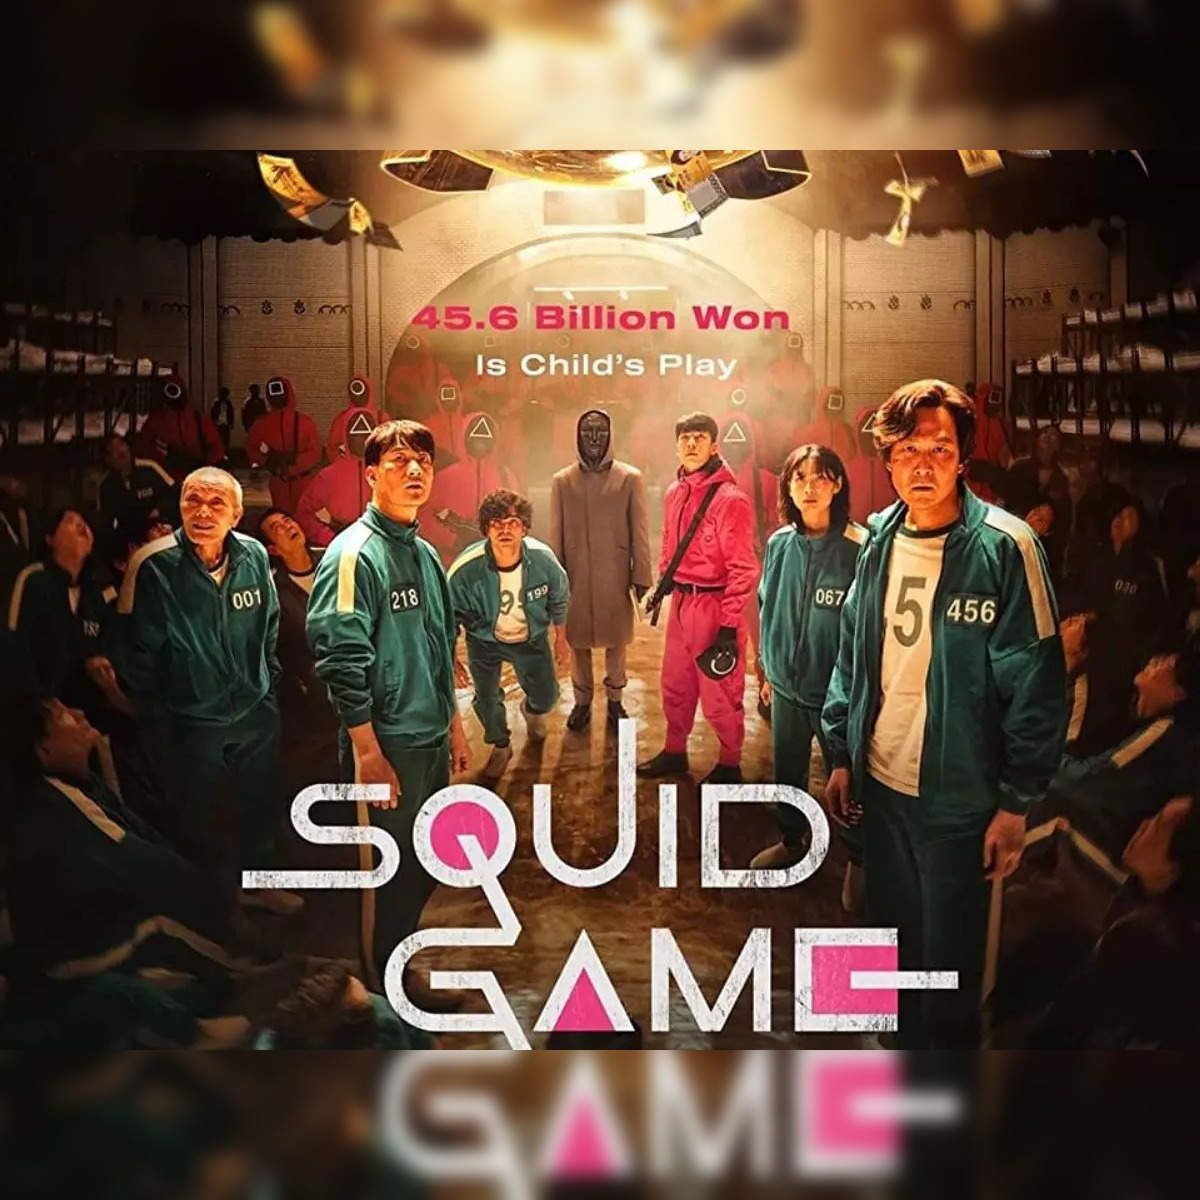 Netflix's Squid Game: The Challenge new trailer released